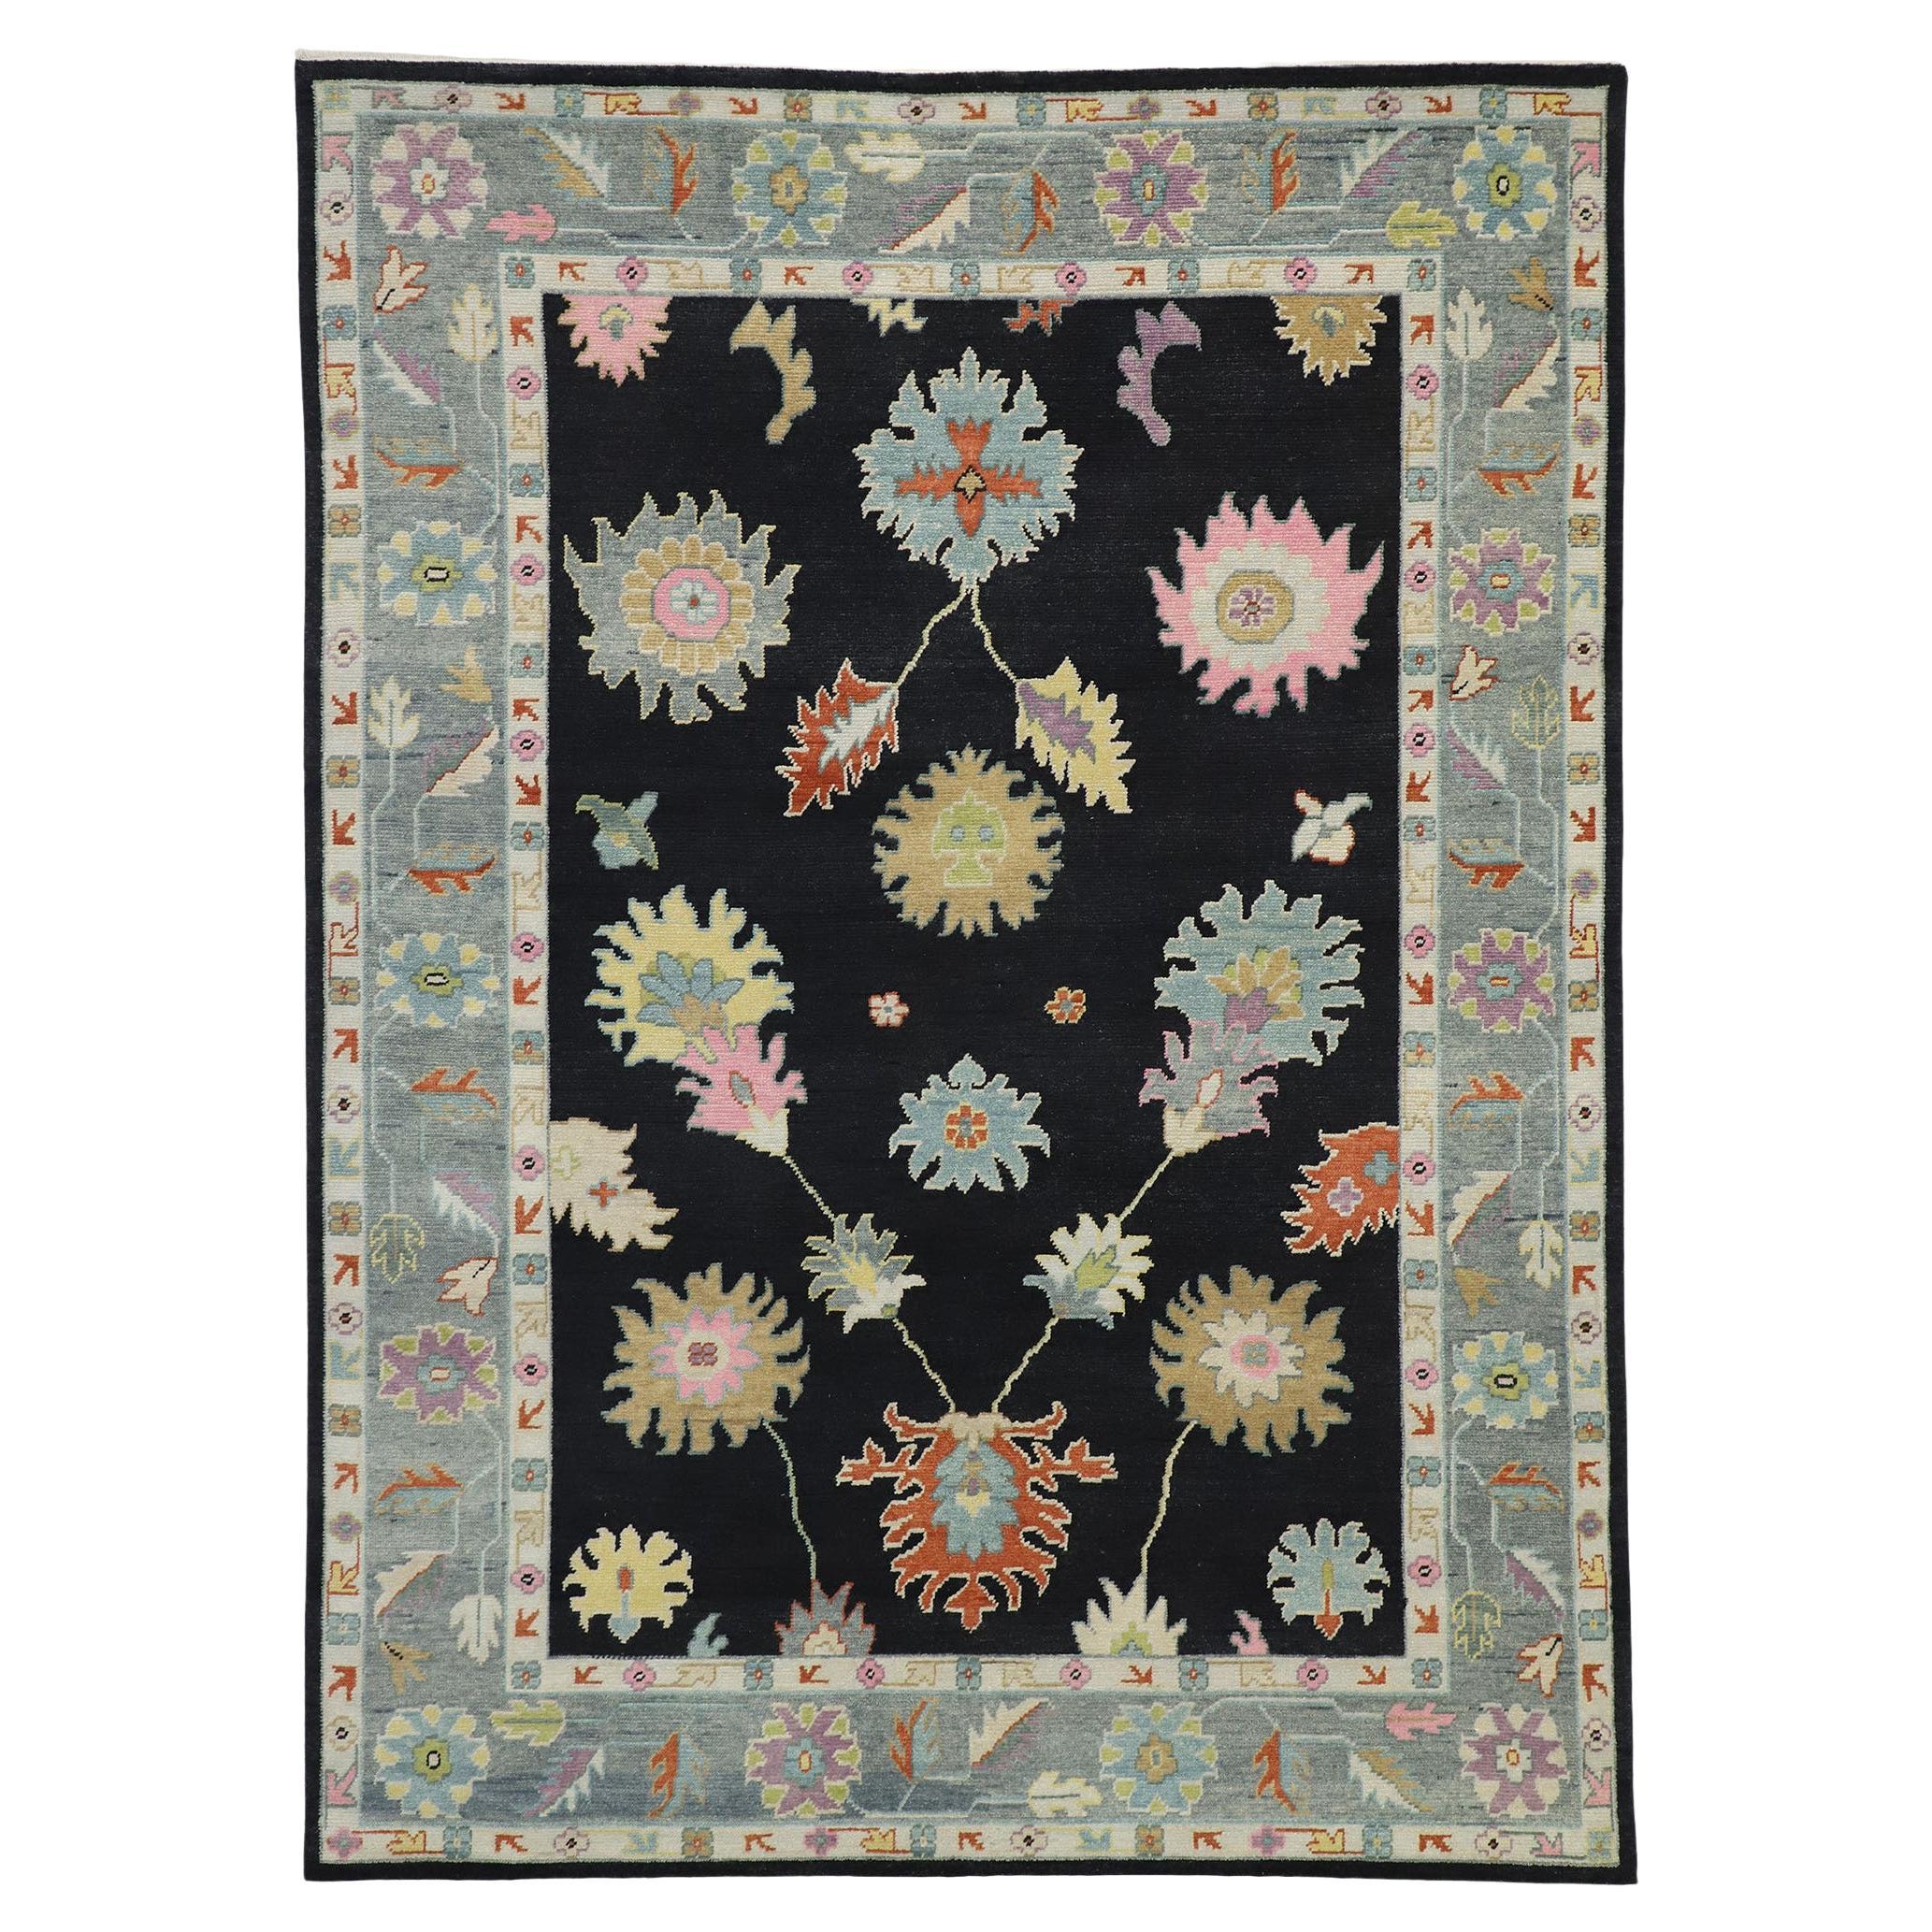 New Contemporary Colorful Oushak Rug